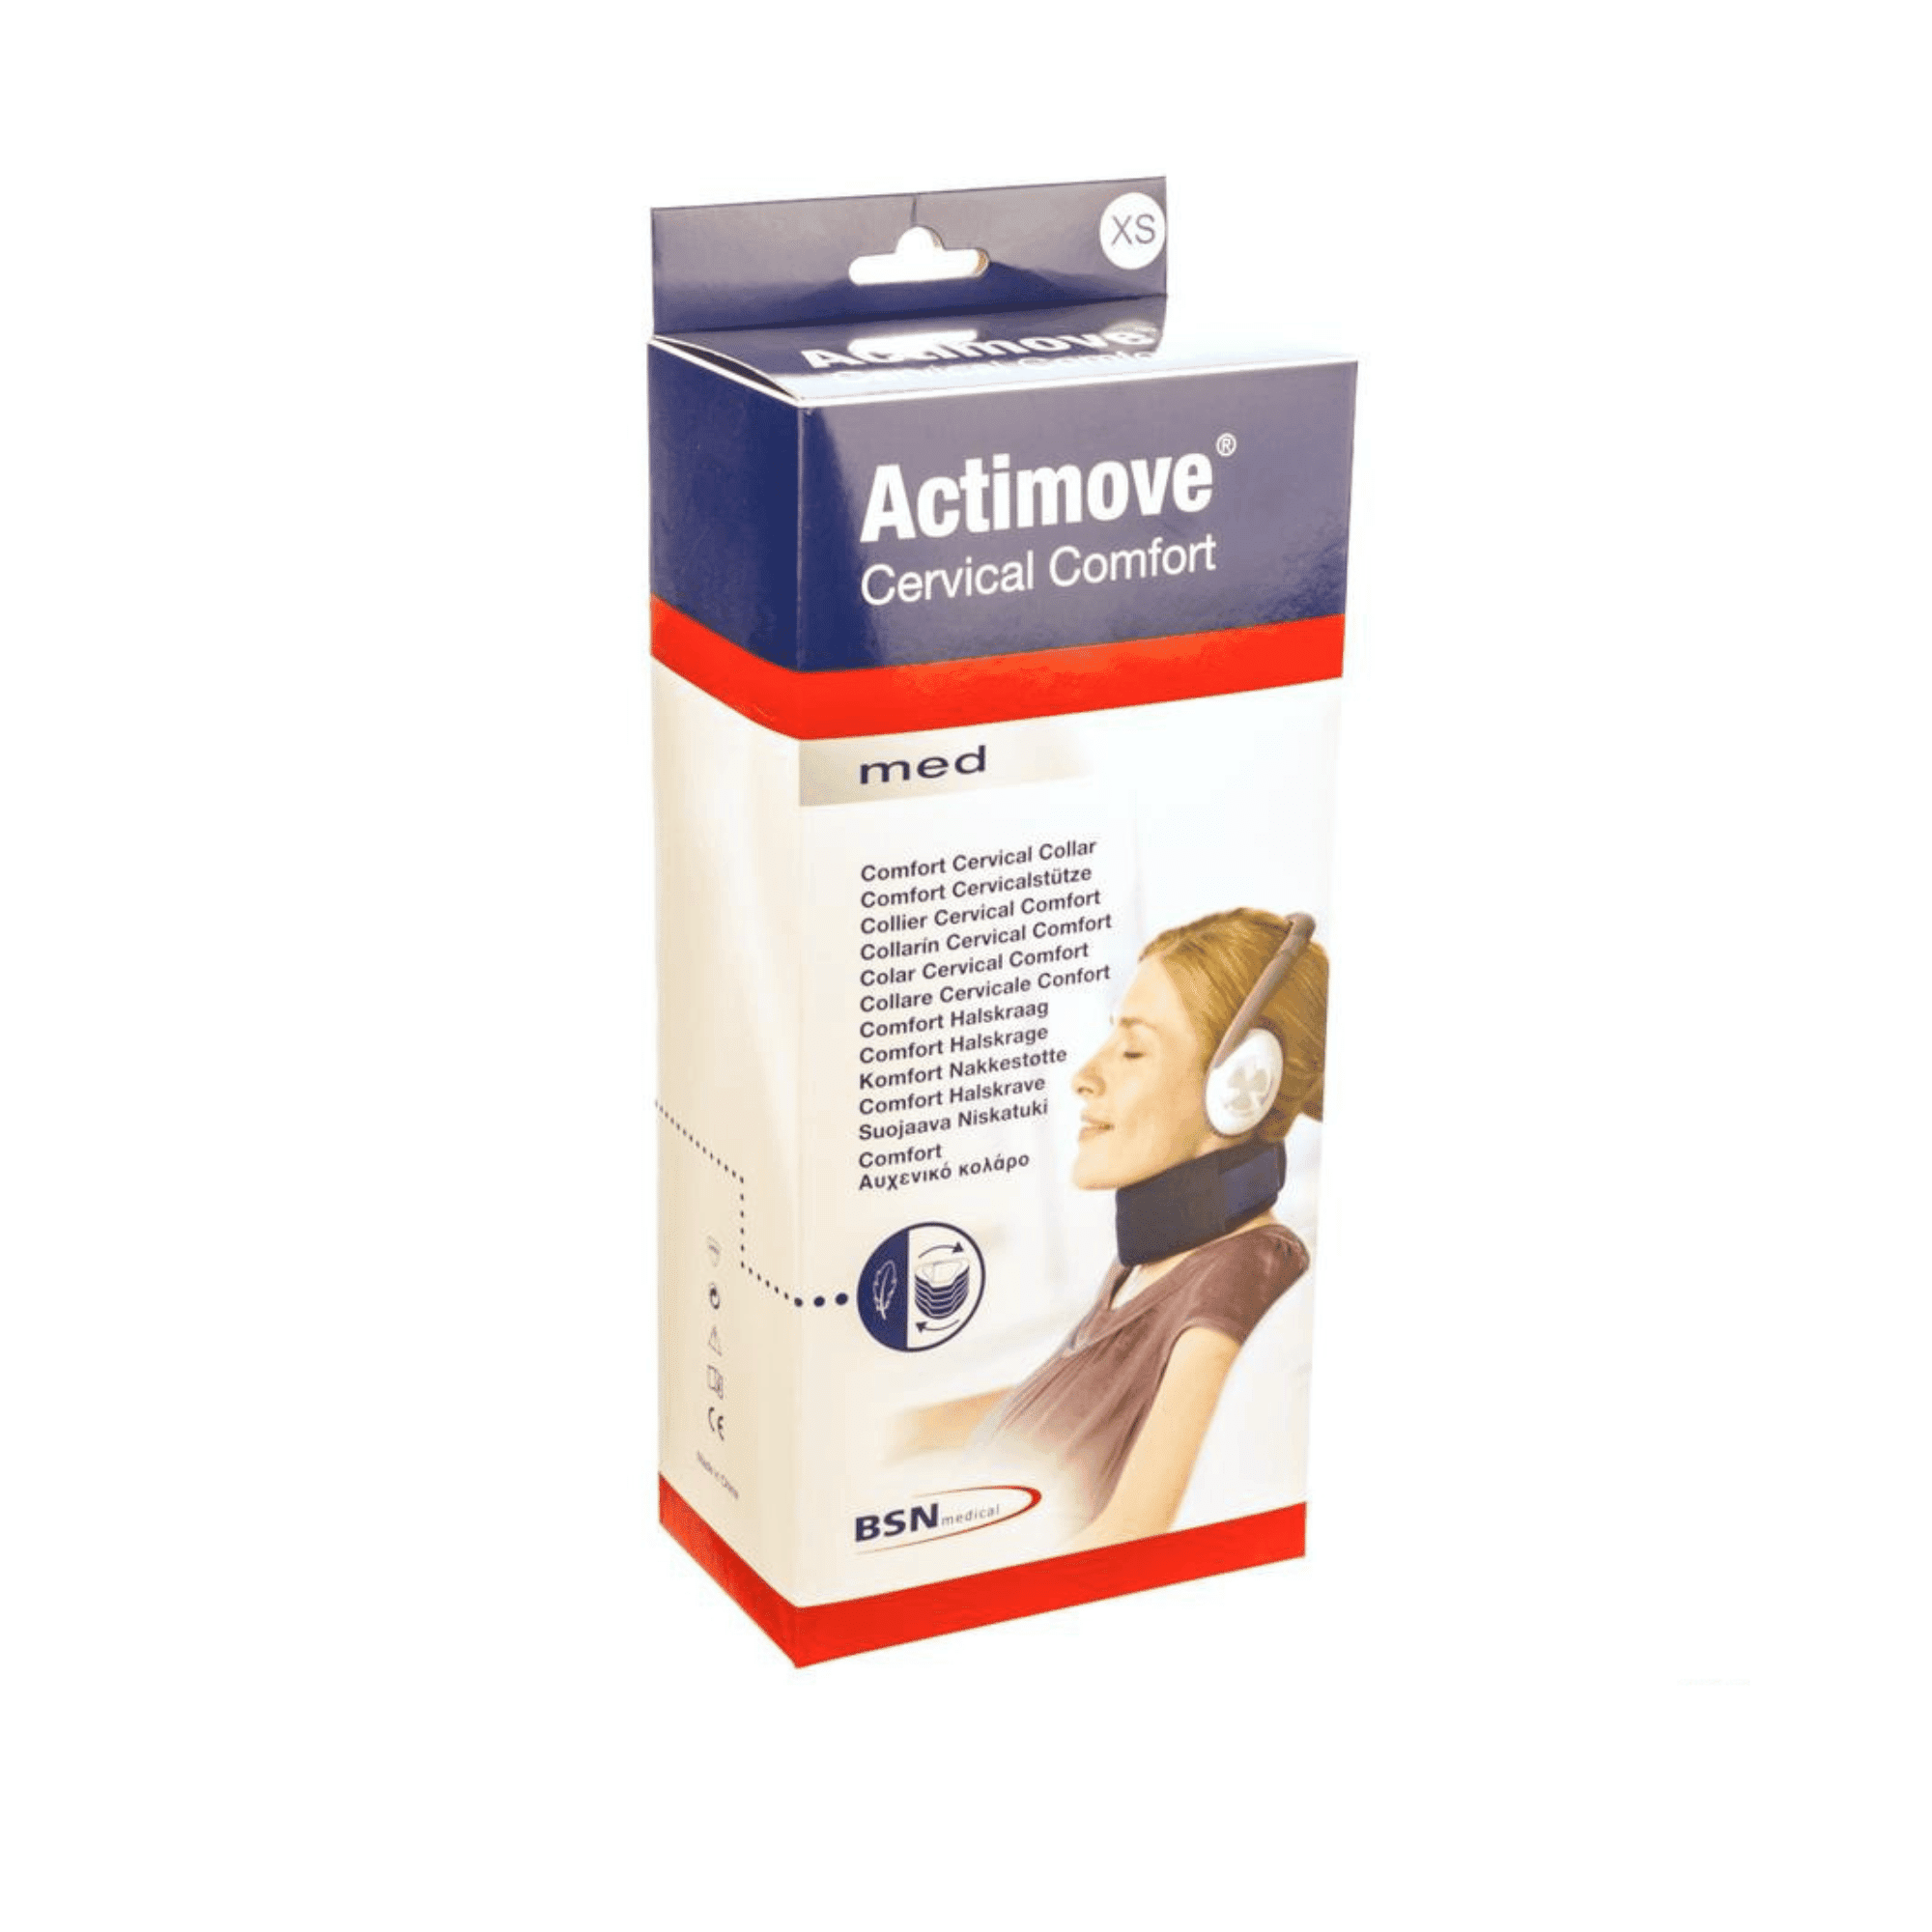 Actimove Cervical Comfort XS